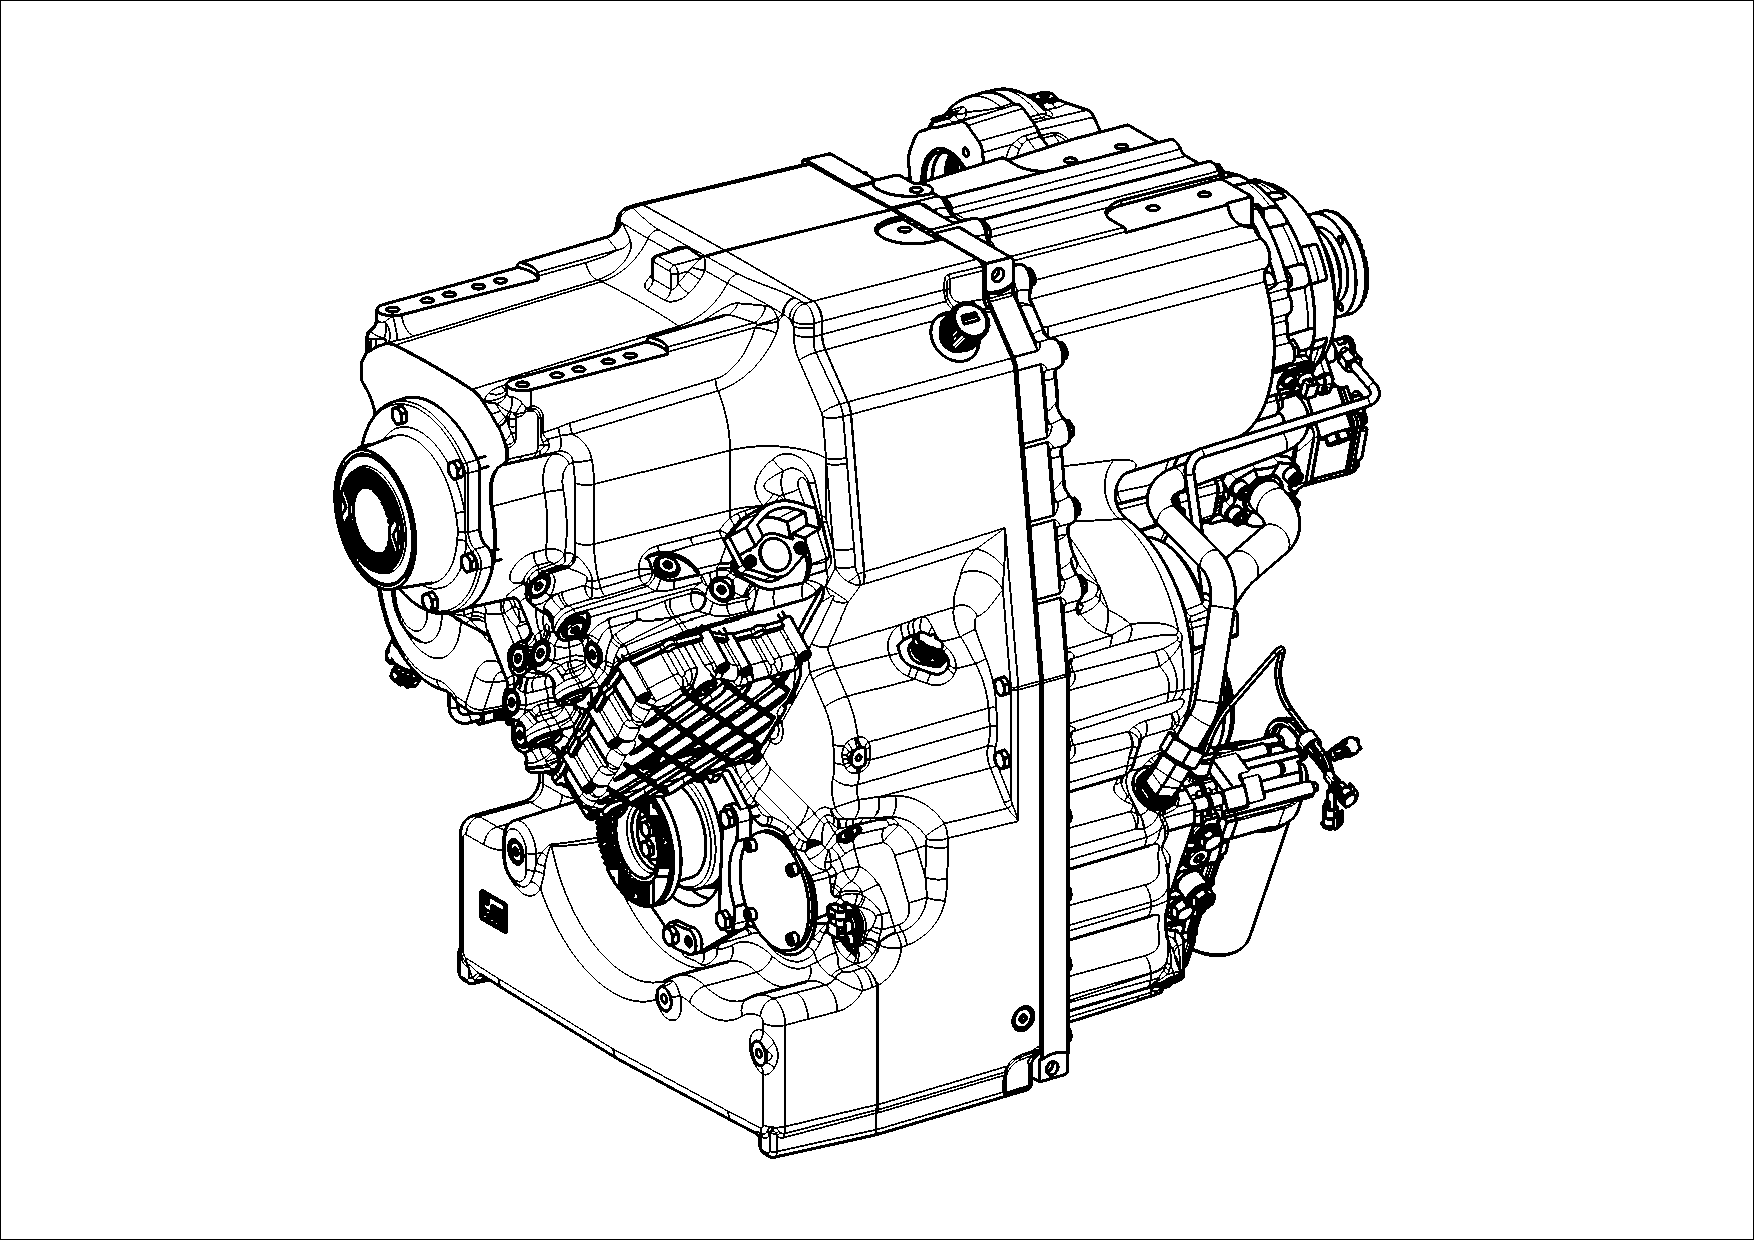 drawing for SENNEBOGEN HYDRAULIKBAGGER GMBH 007898 - SNAP RING (figure 1)